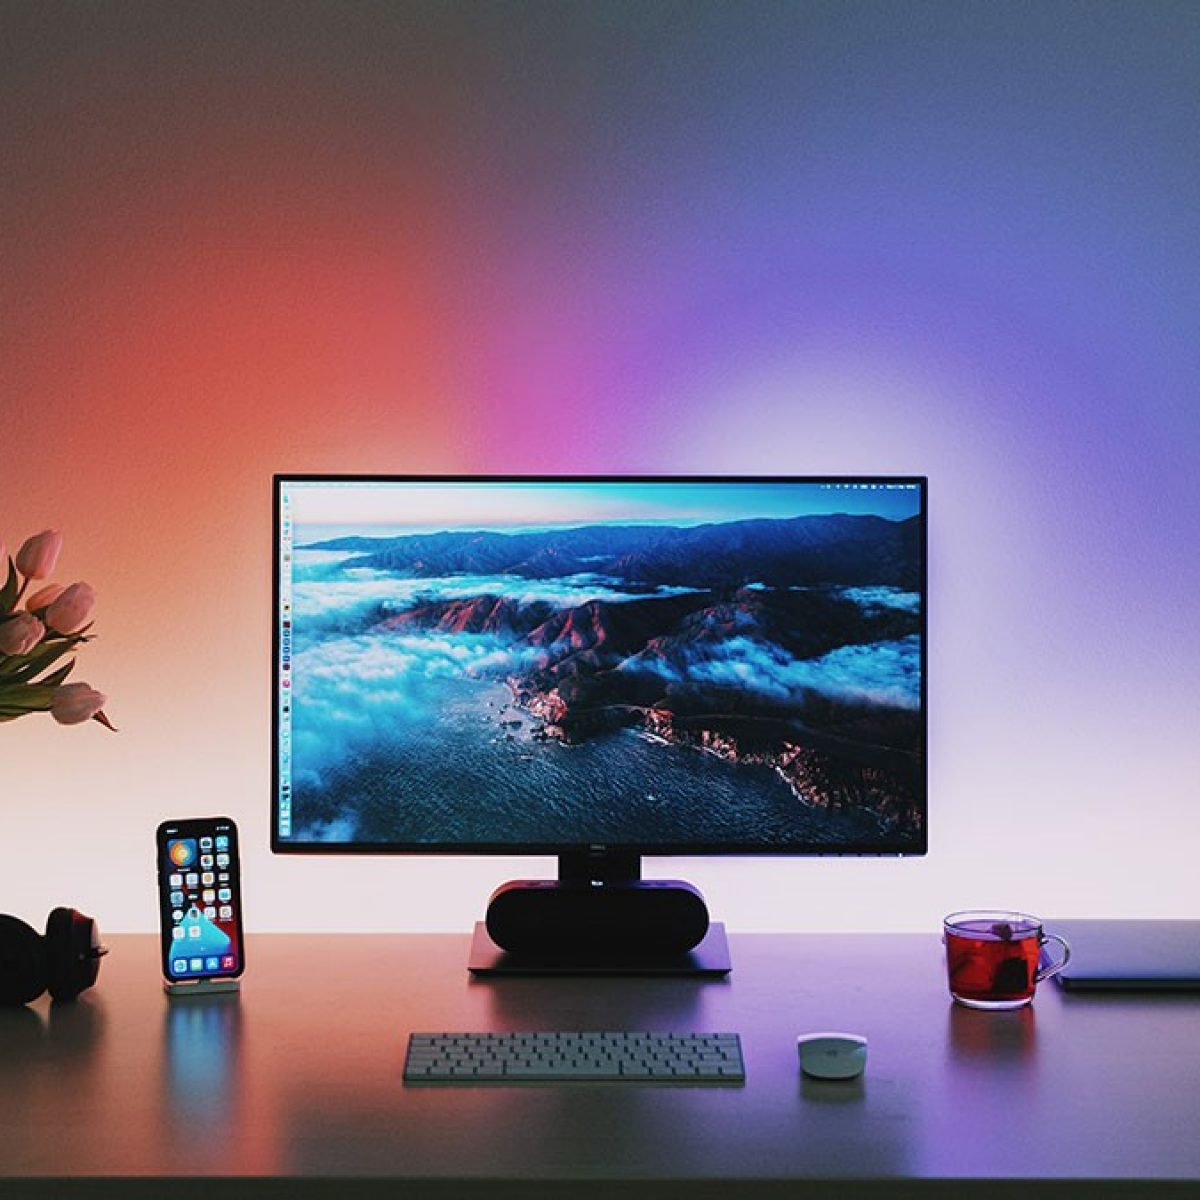 How To Use Your TV As A Computer Monitor